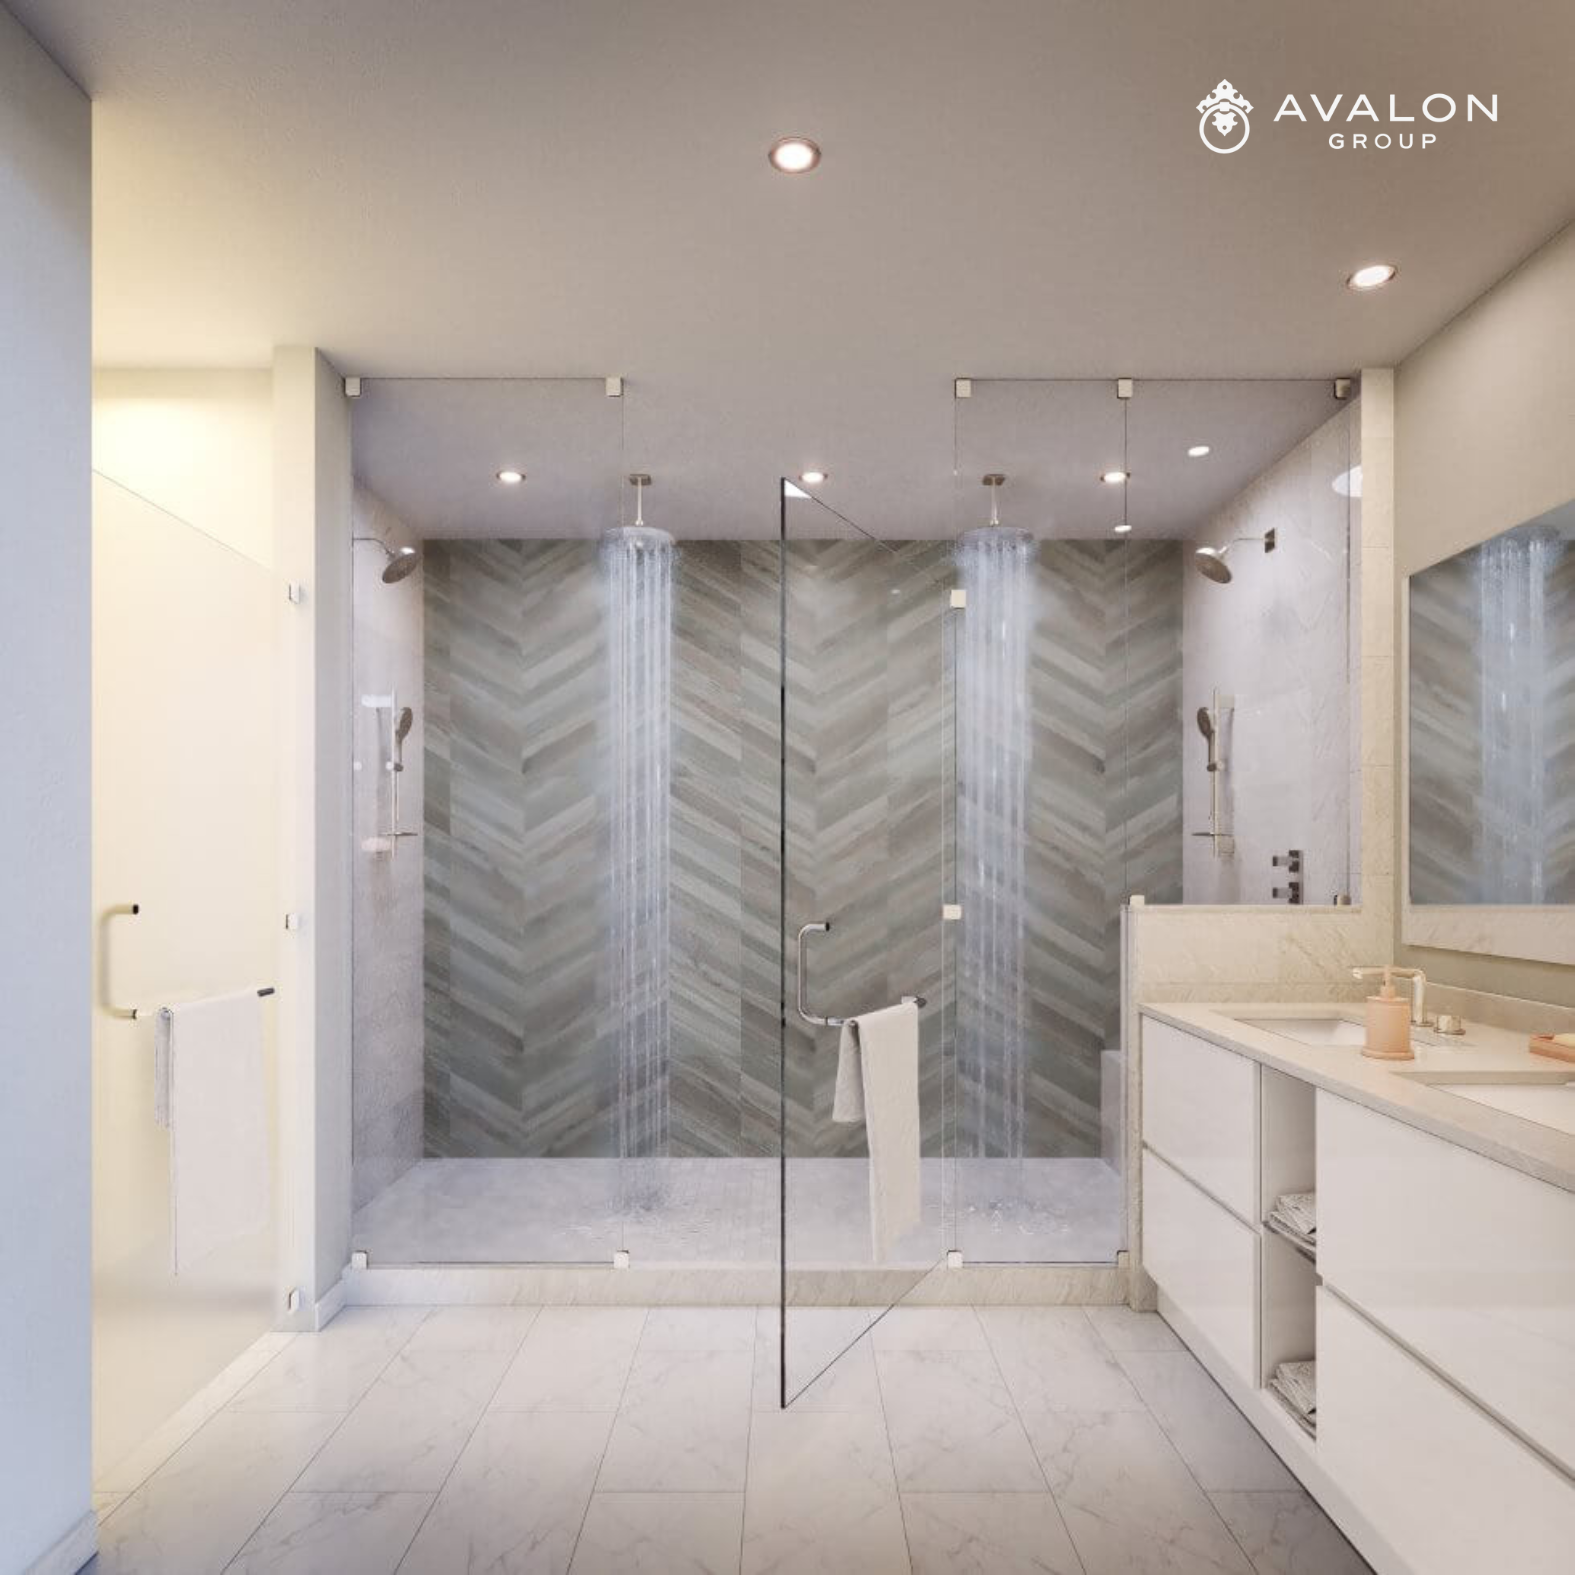 Residences at 400 Central Construction Picture of the double spa shower with marble facade.